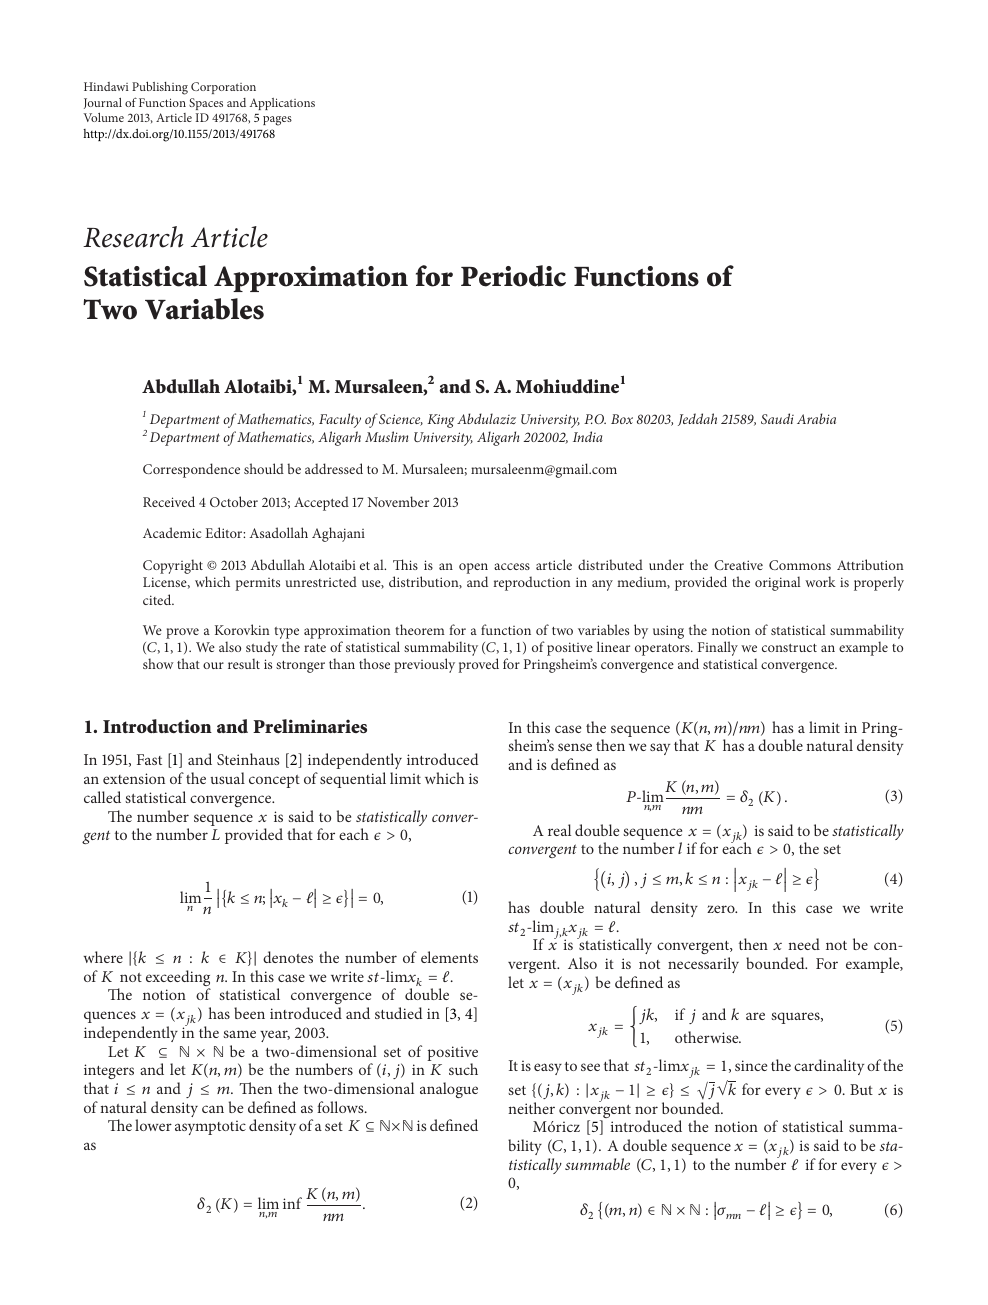 Statistical Approximation For Periodic Functions Of Two Variables Topic Of Research Paper In Mathematics Download Scholarly Article Pdf And Read For Free On Cyberleninka Open Science Hub